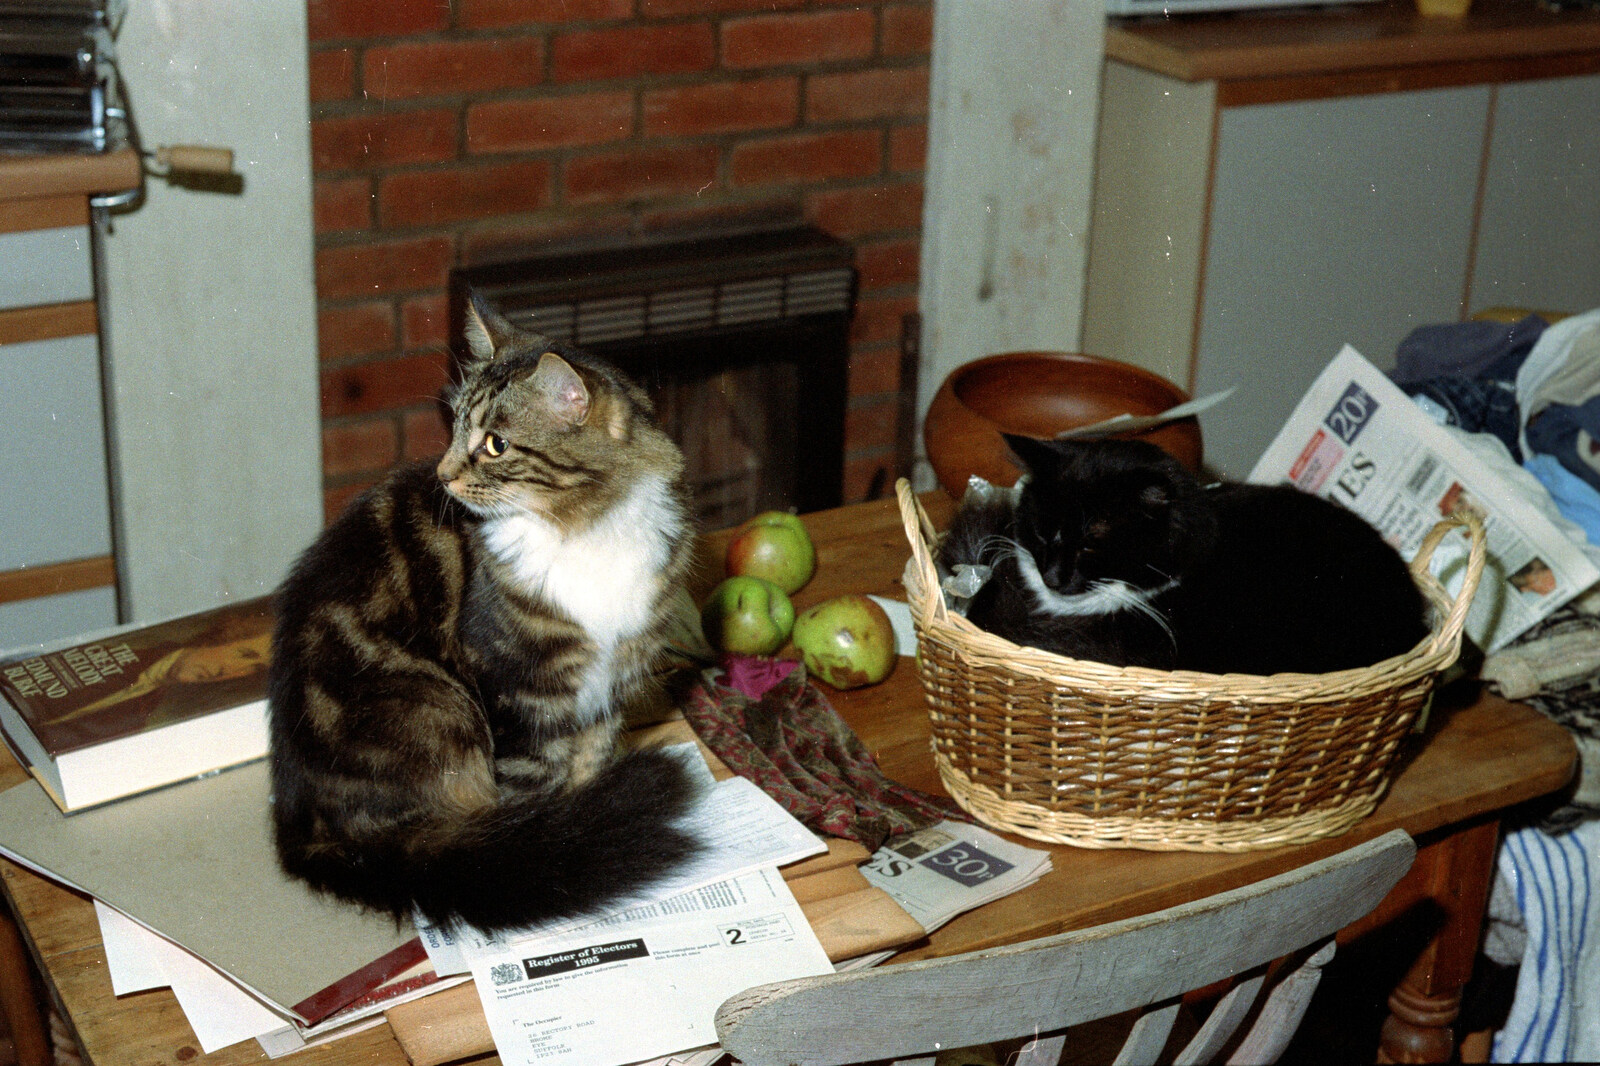 Sophie and The Sock on the kitchen table from Bedroom Demolition, Brome, Suffolk - 10th October 1994